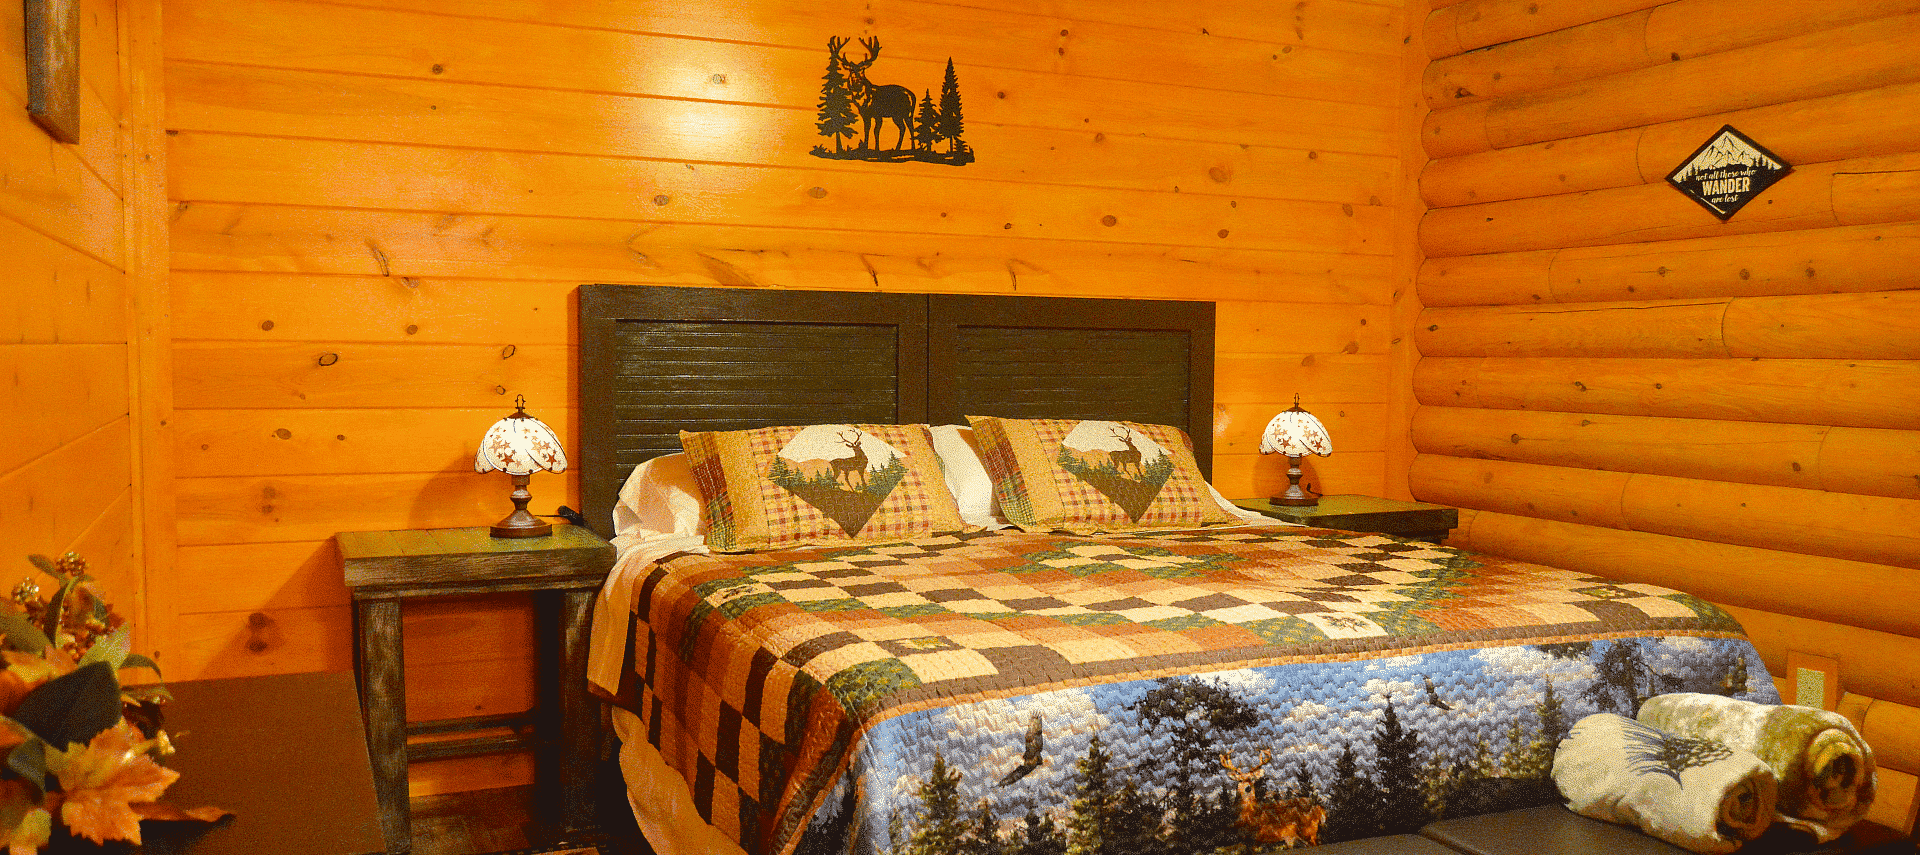 Bedroom in a log home with king bed, colorful quilt, and bedside tables with small tiffany lamps